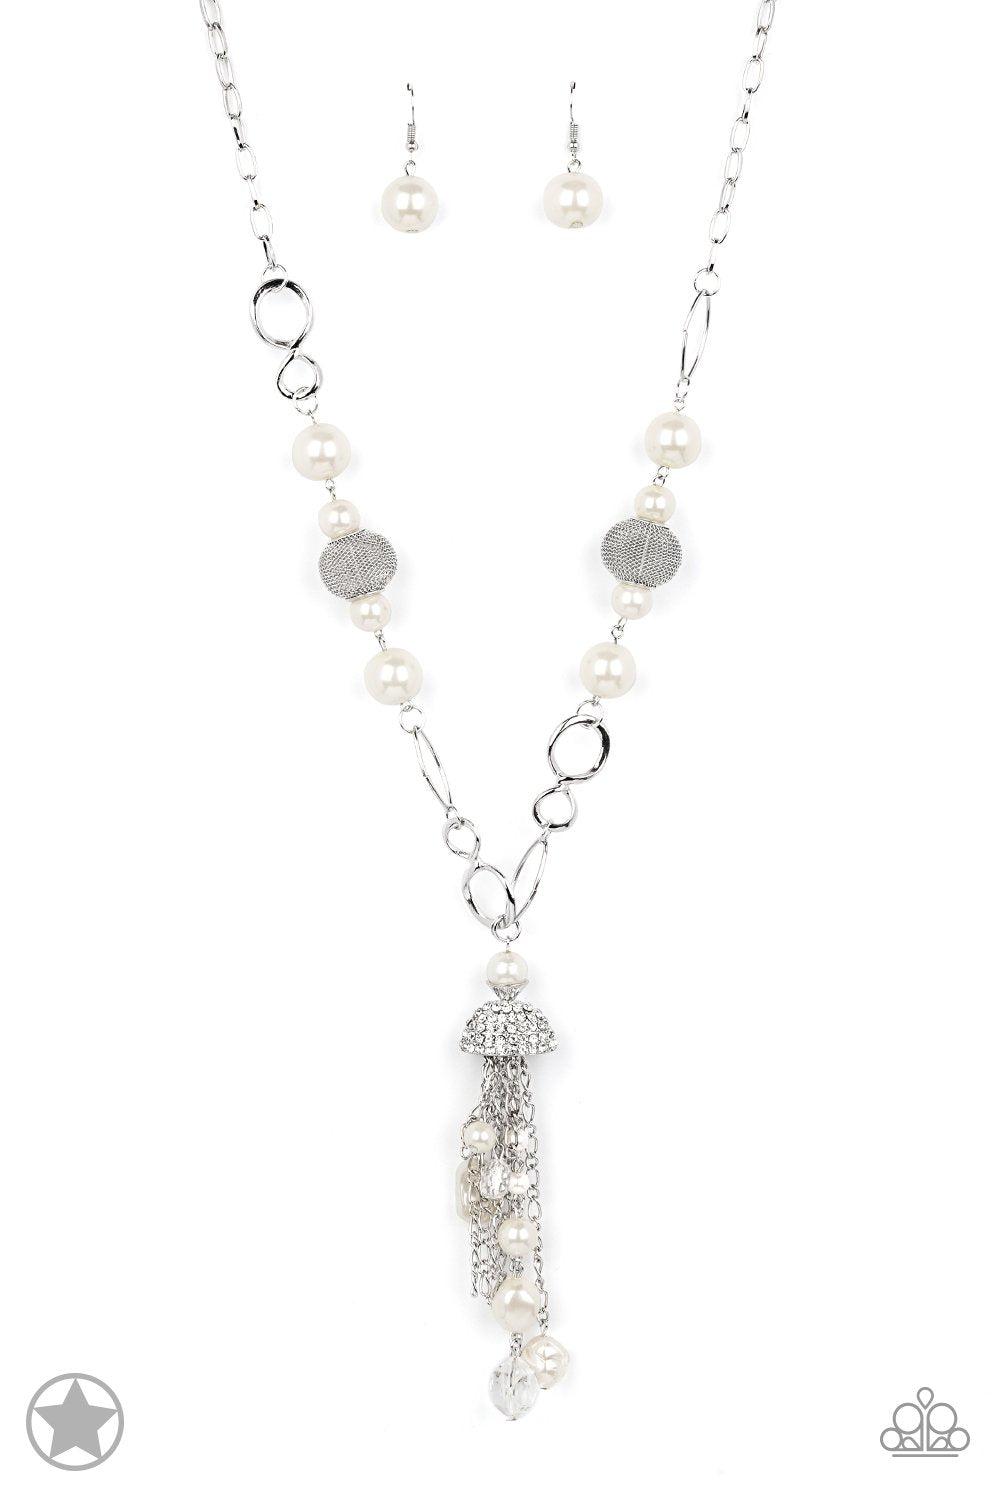 Designated Diva Long White Tassel Necklace and matching Earrings - Paparazzi Accessories - lightbox -CarasShop.com - $5 Jewelry by Cara Jewels